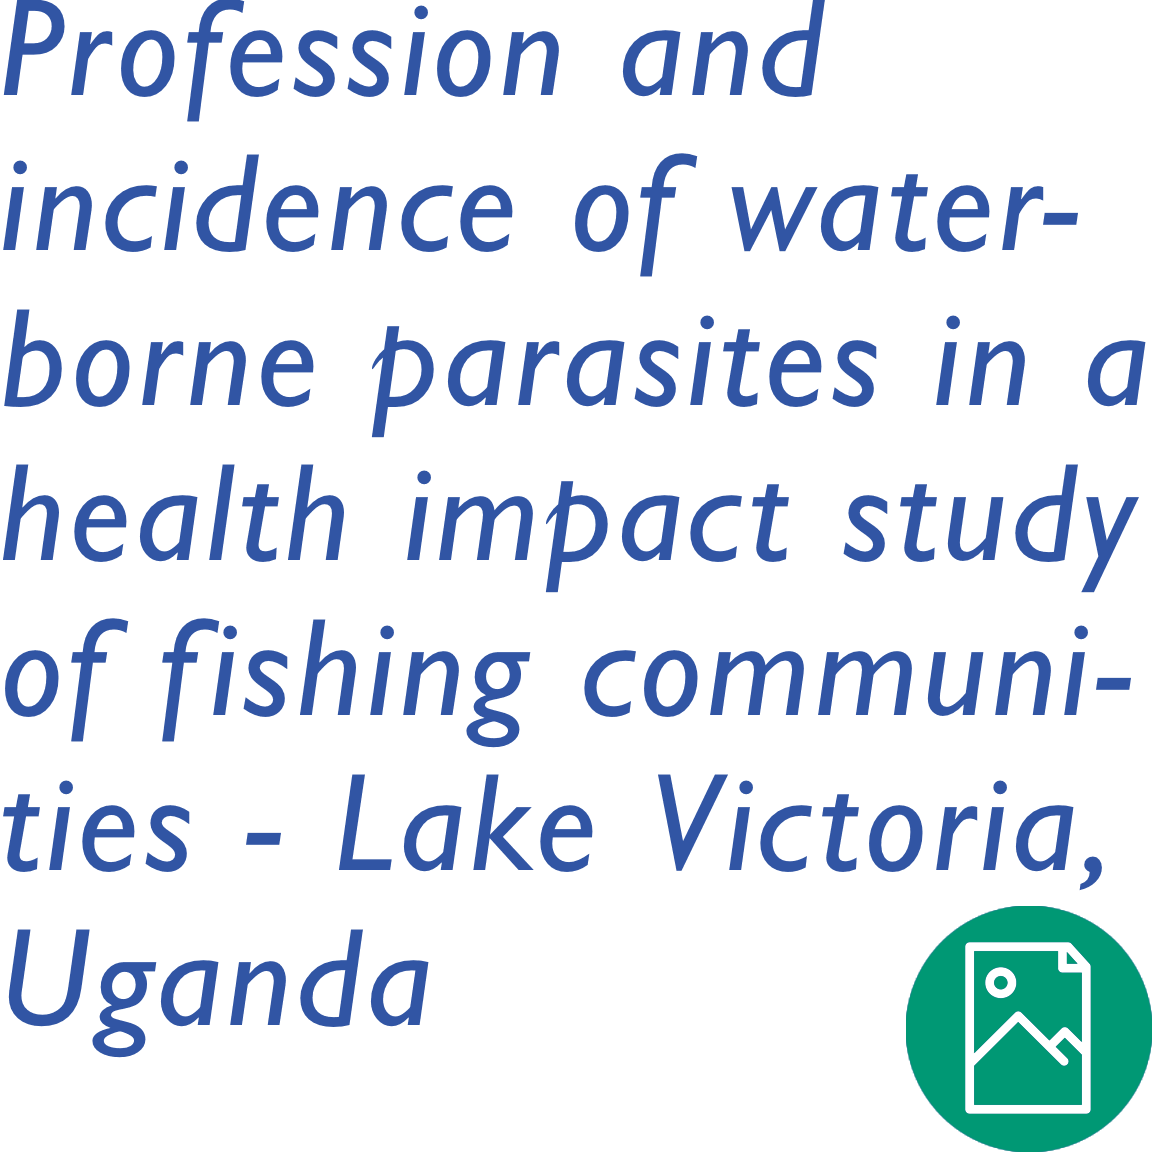 Profession and Incidence of Water-borne Parasites in a Health Impact Study of Fishing Communities along Lake Victoria in Uganda | Water Mission Research